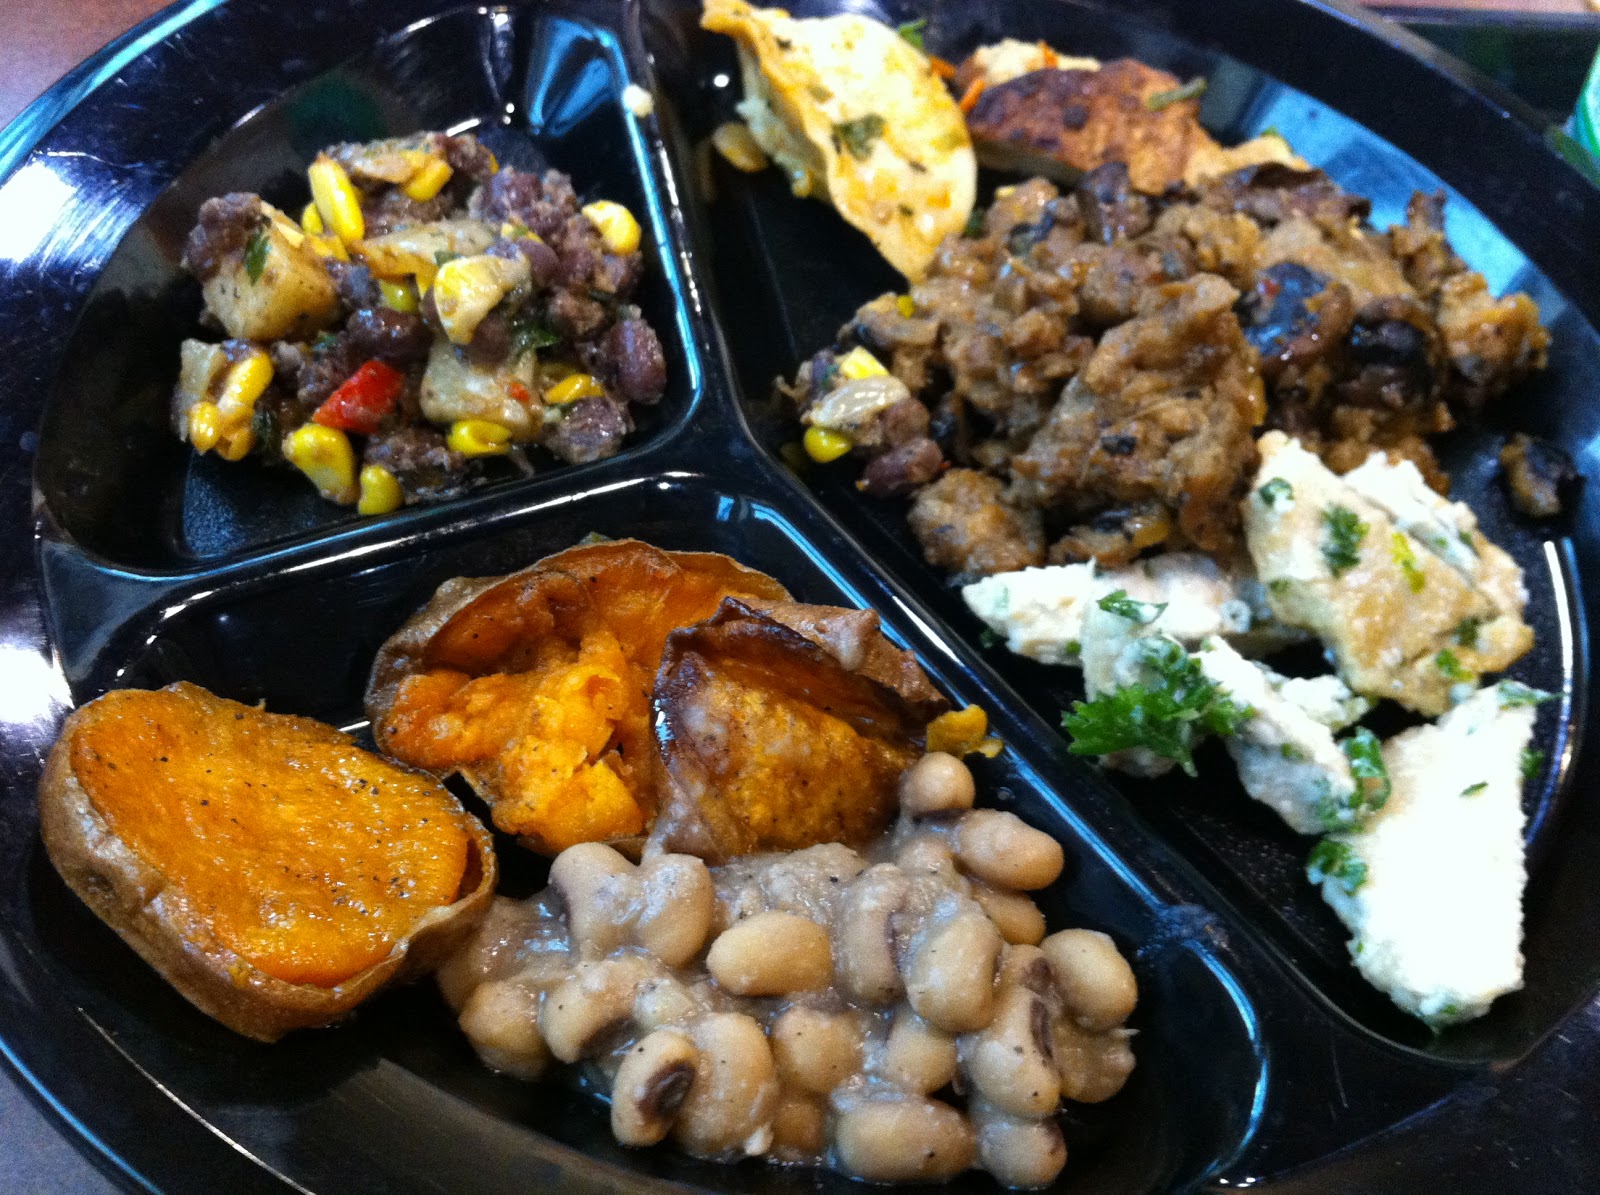 Martys Flying Vegan Review Earth Fare In Raleigh Offers Vegan Buffe